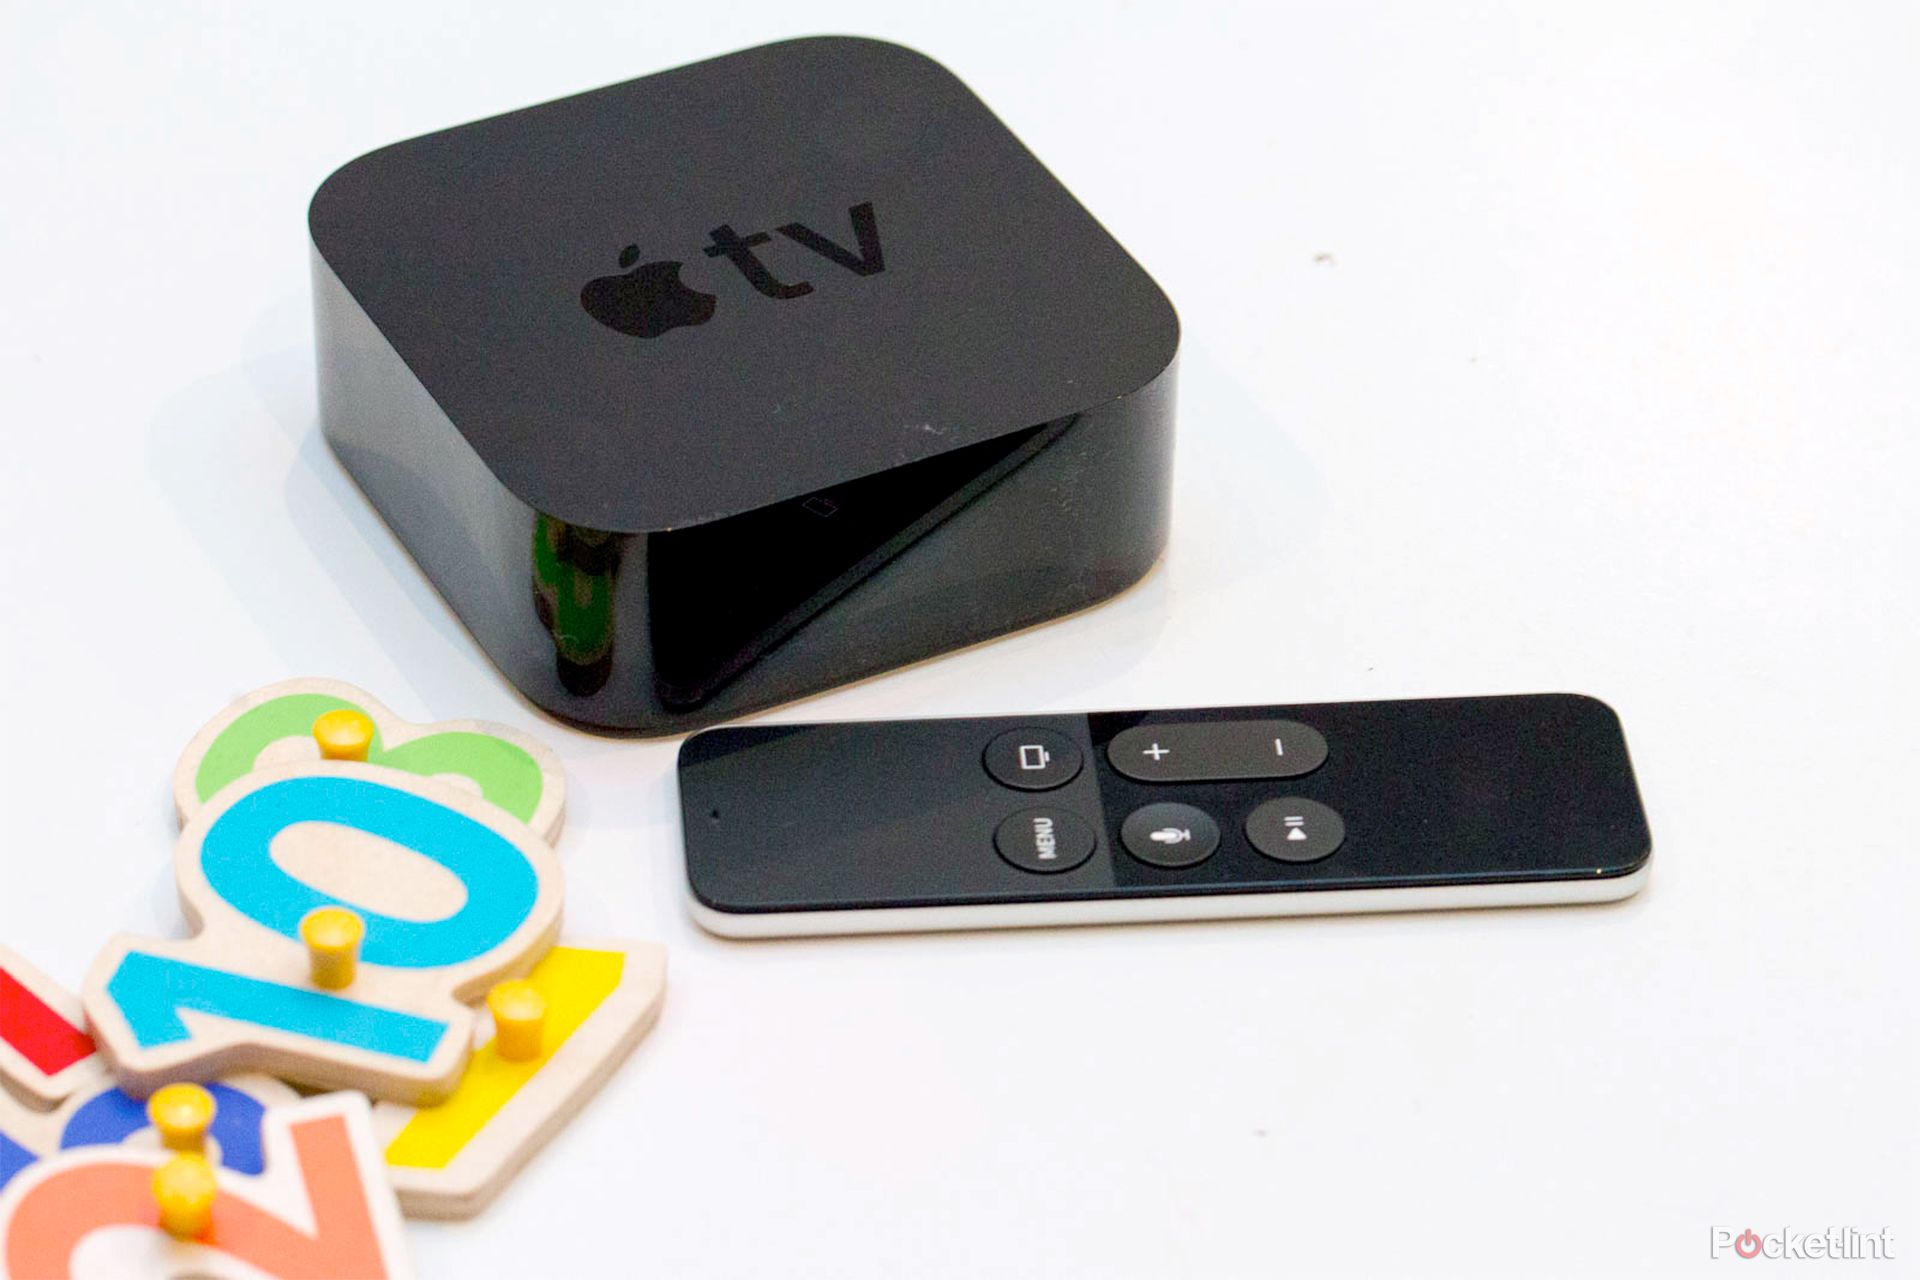 apple tv review image 1